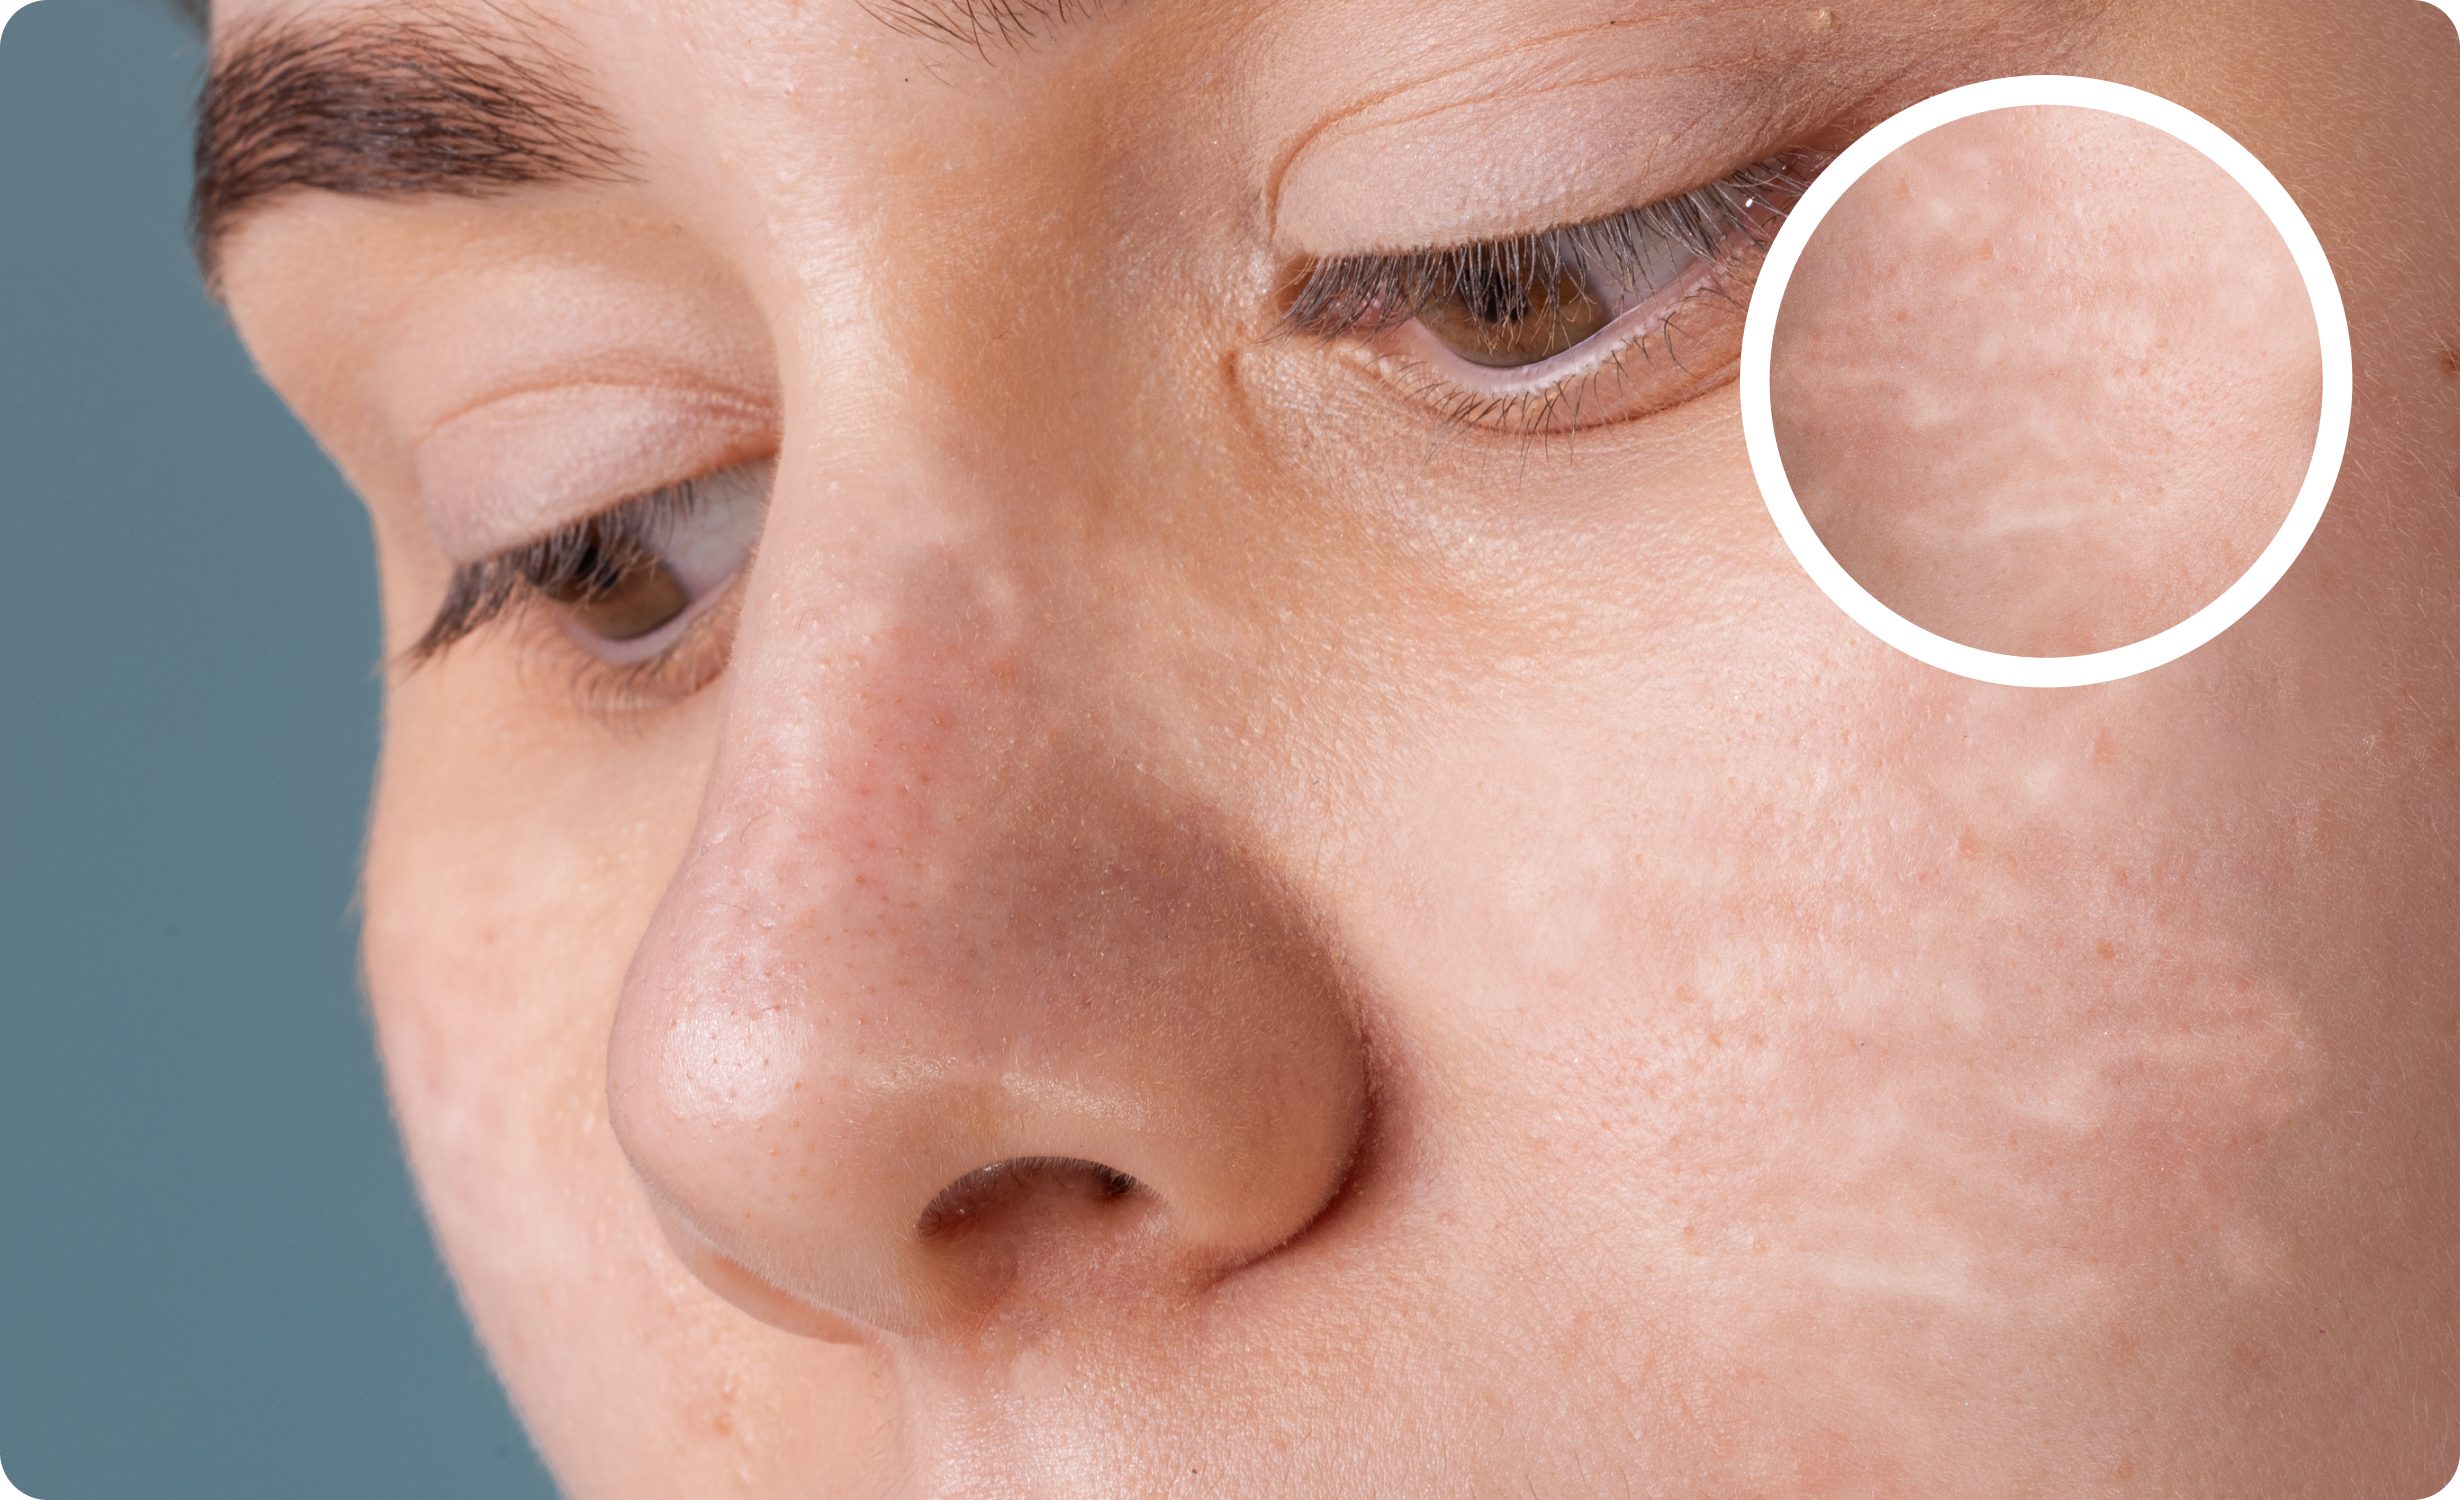 A close-up image of a person with uneven skin tone condition. An inset magnifies a section of the skin, highlighting areas with pigmentation issues and texture irregularities.